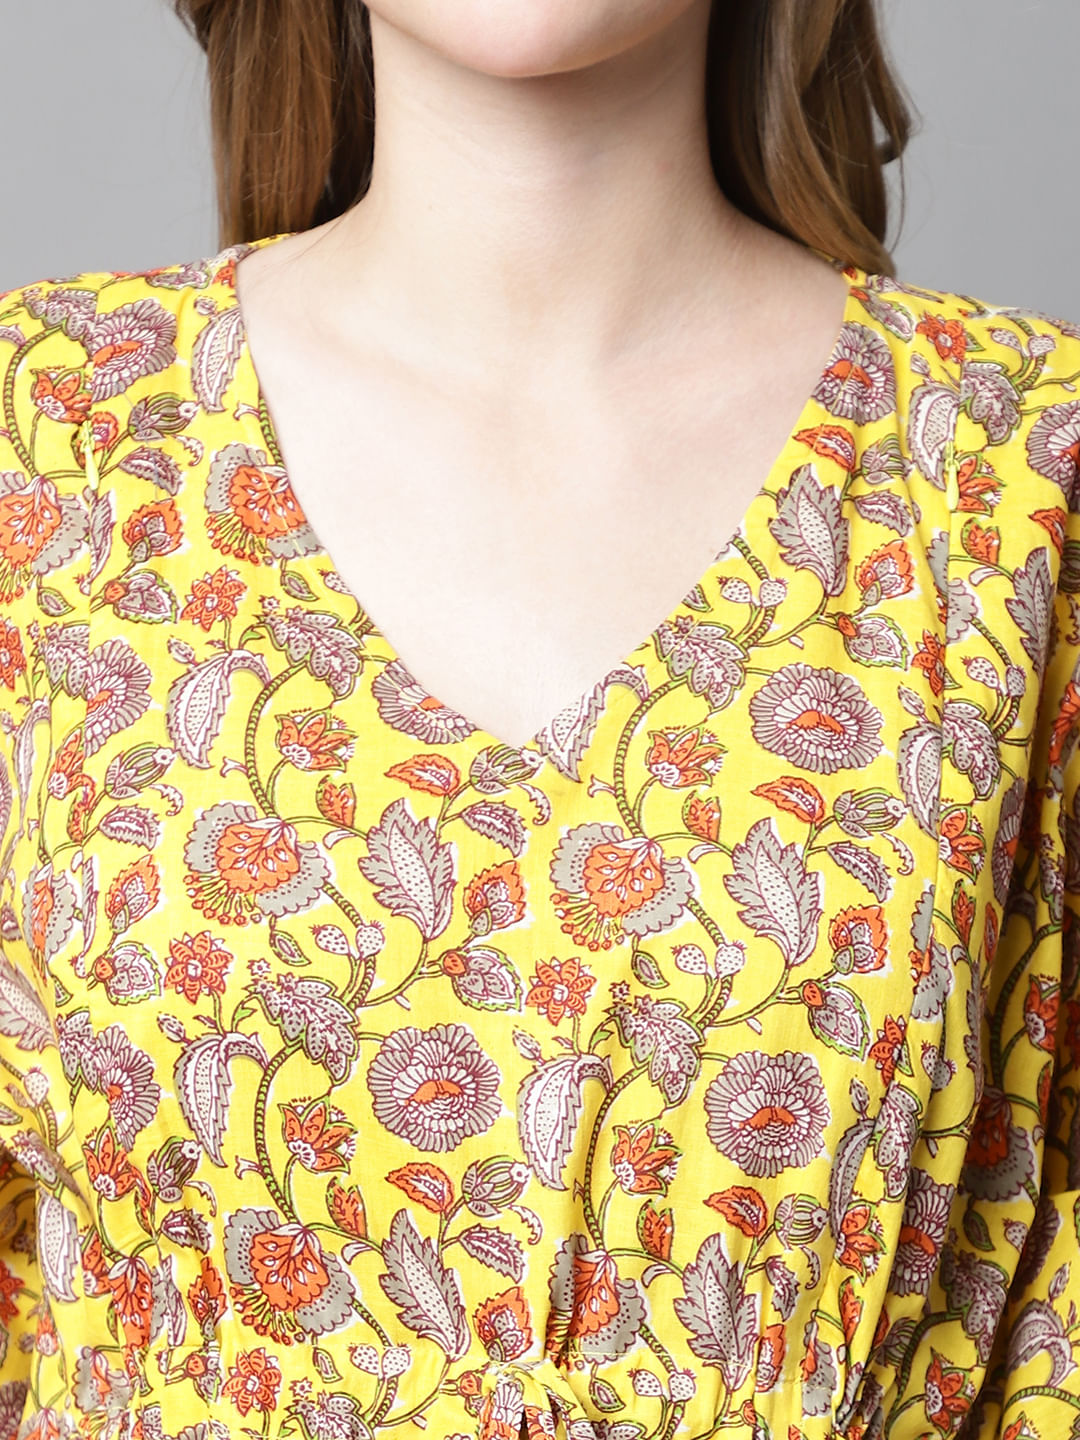 Yellow & Red Floral Maternity Kaftan